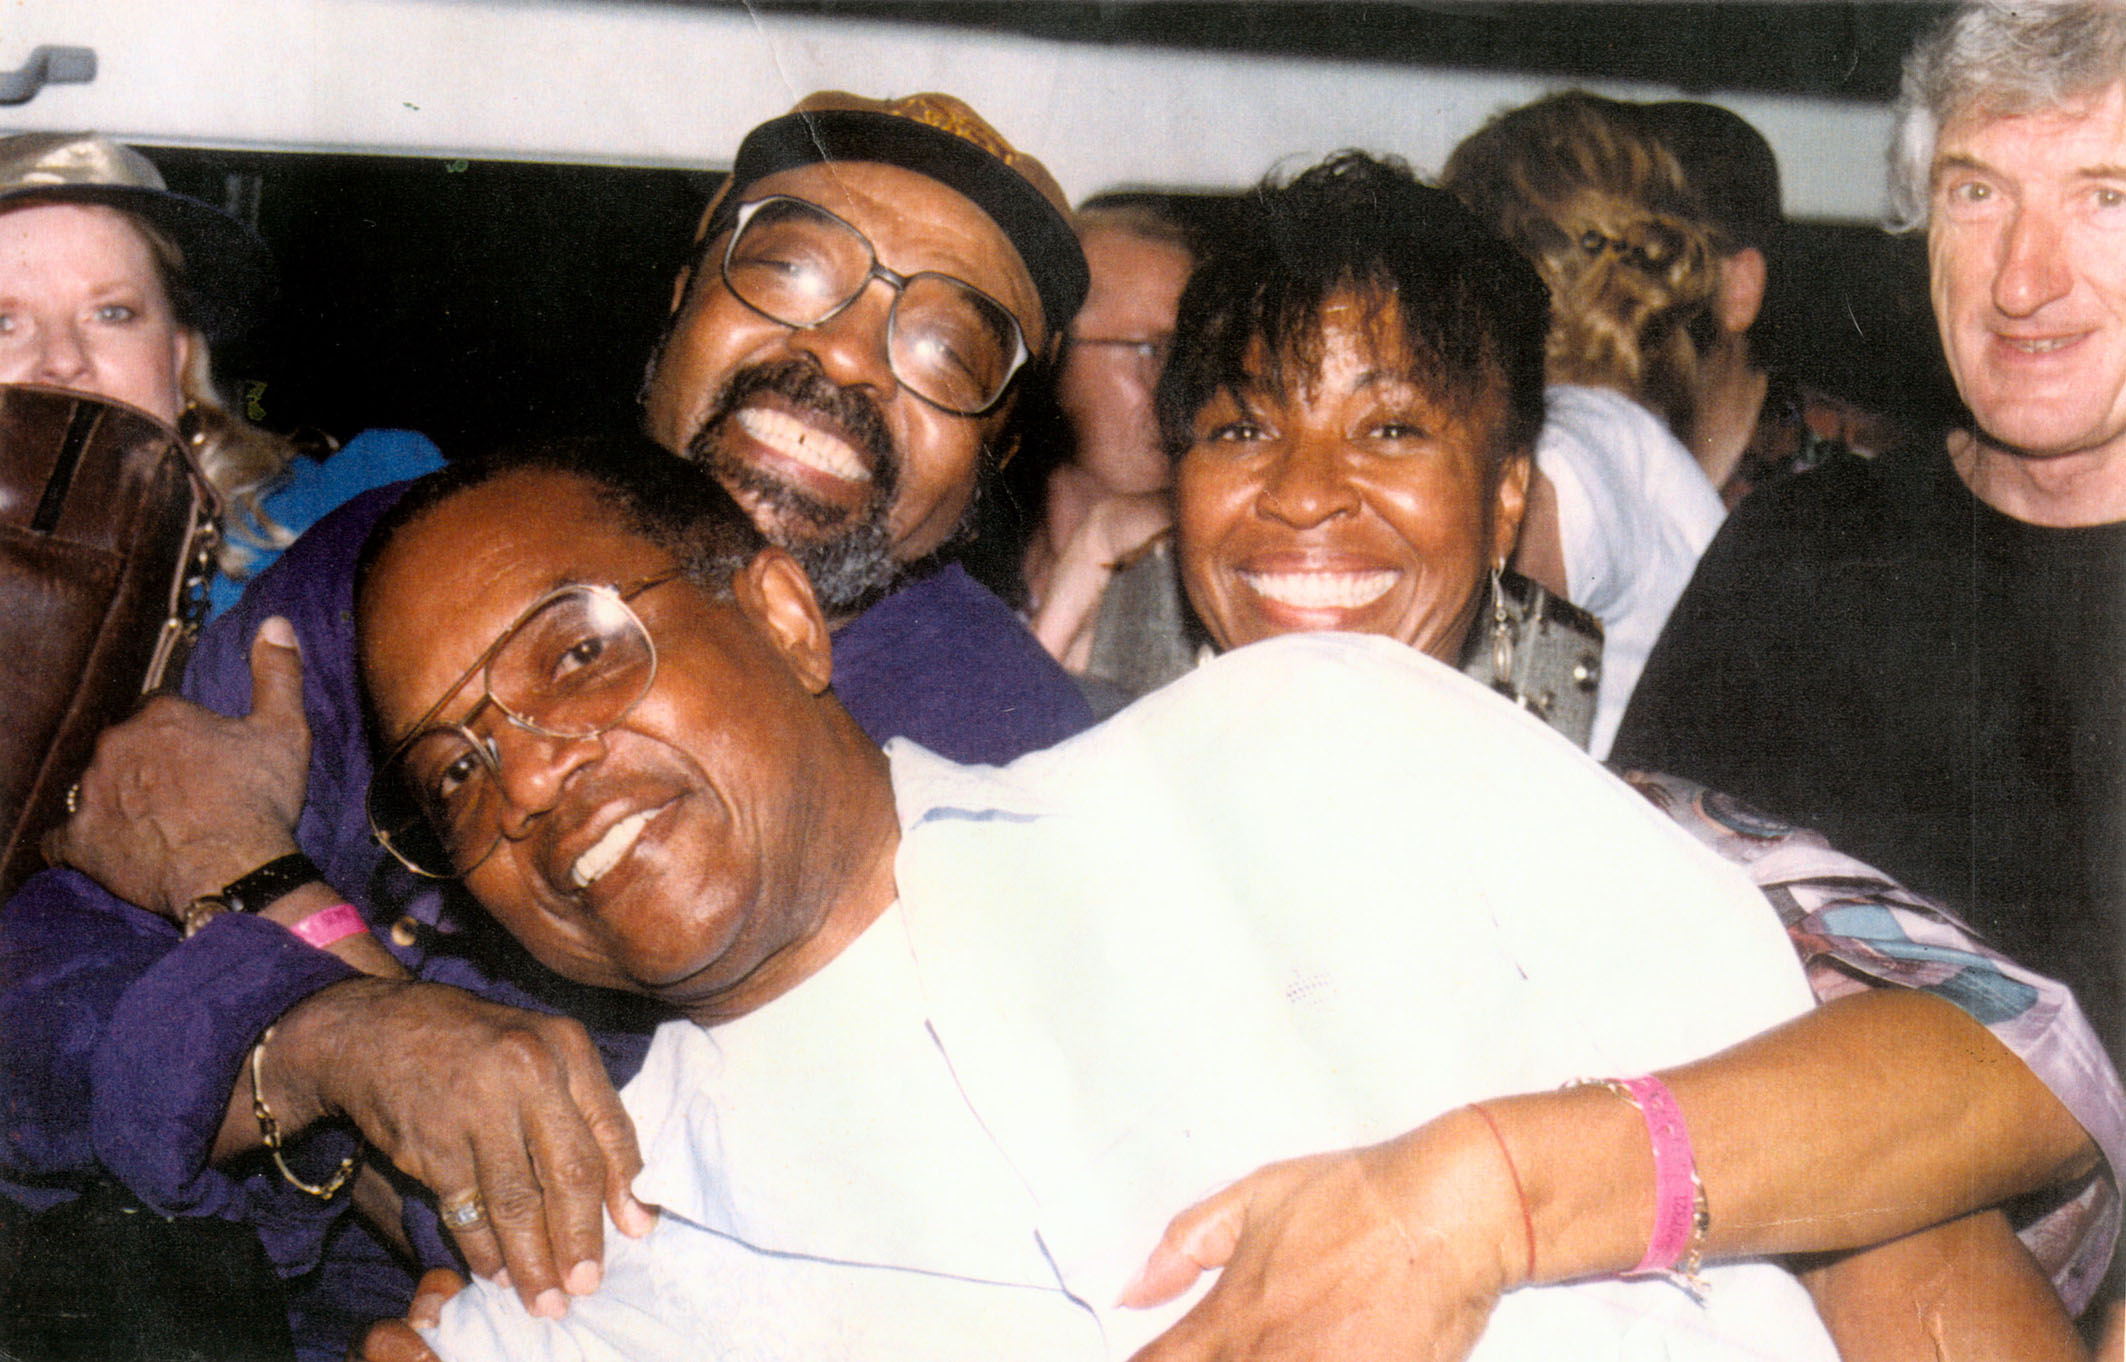 Three smiling faces in forefront. (Left to right) Carlos Malcolm, James Moody- famous international Jazz tenor saxophone/flutist and Myrna Hague-Bradshaw, singer and wife of Sonny Bradshaw, founder of the Ocho Rios Jazz Festival, Both Moody and Malcolm were inducted into Hall of Fame of Ocho Rios Jazz Festival.